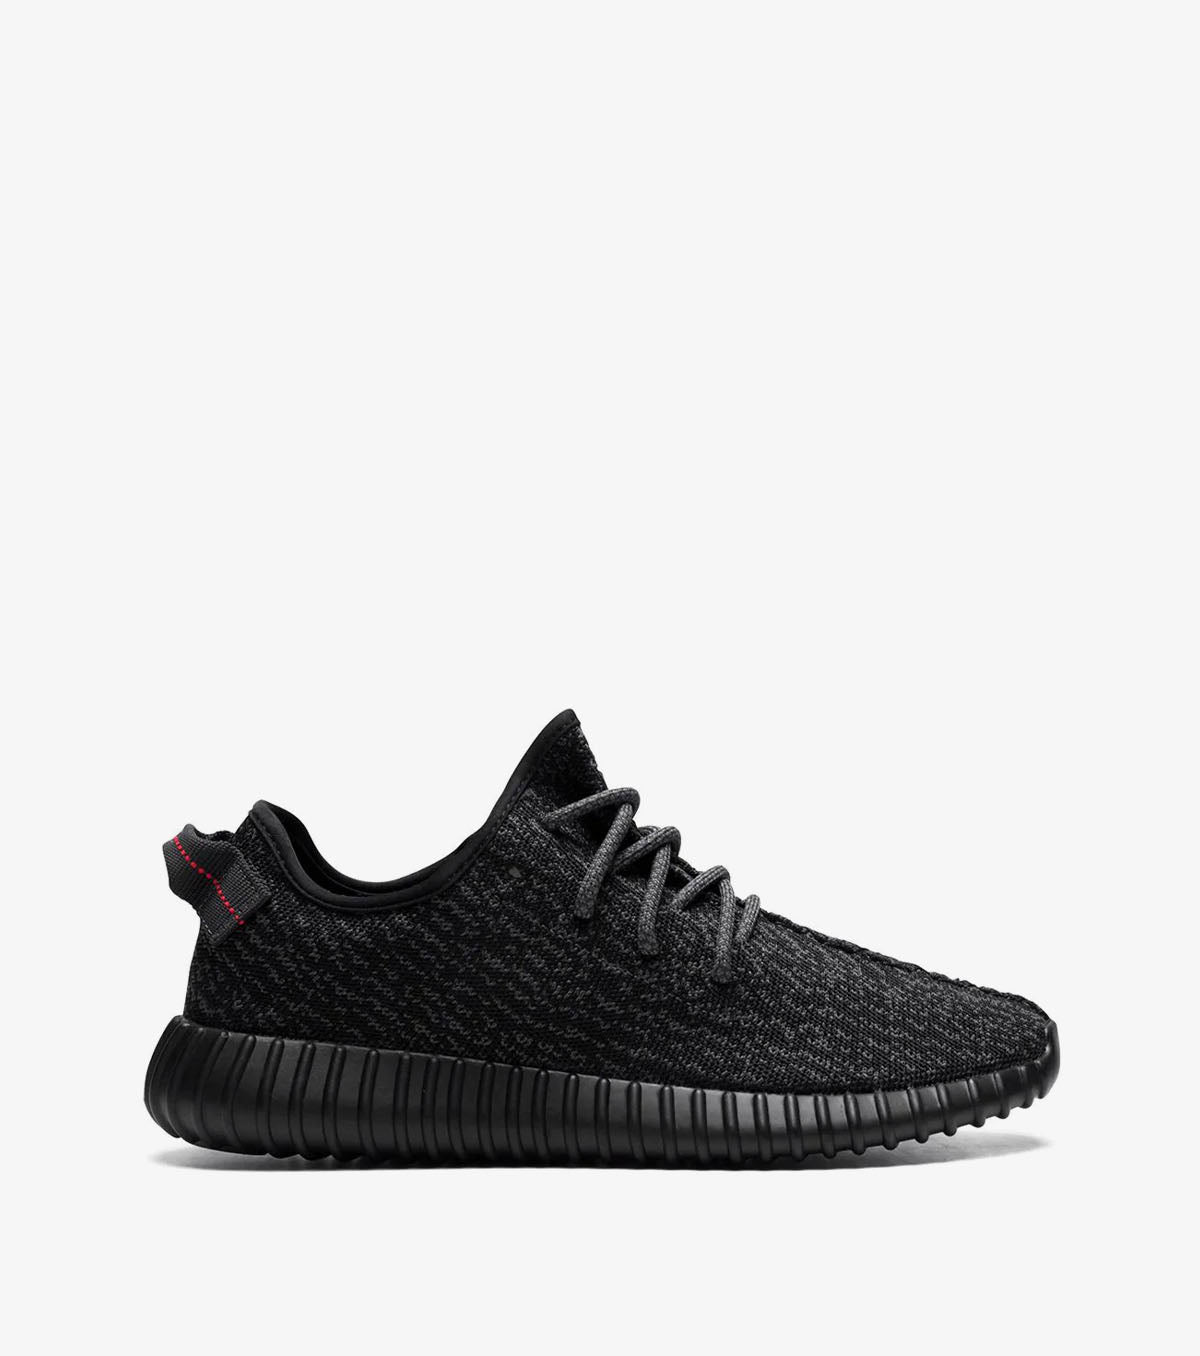 Yeezy Boost 350 "Pirate Black" - SNKRBASE